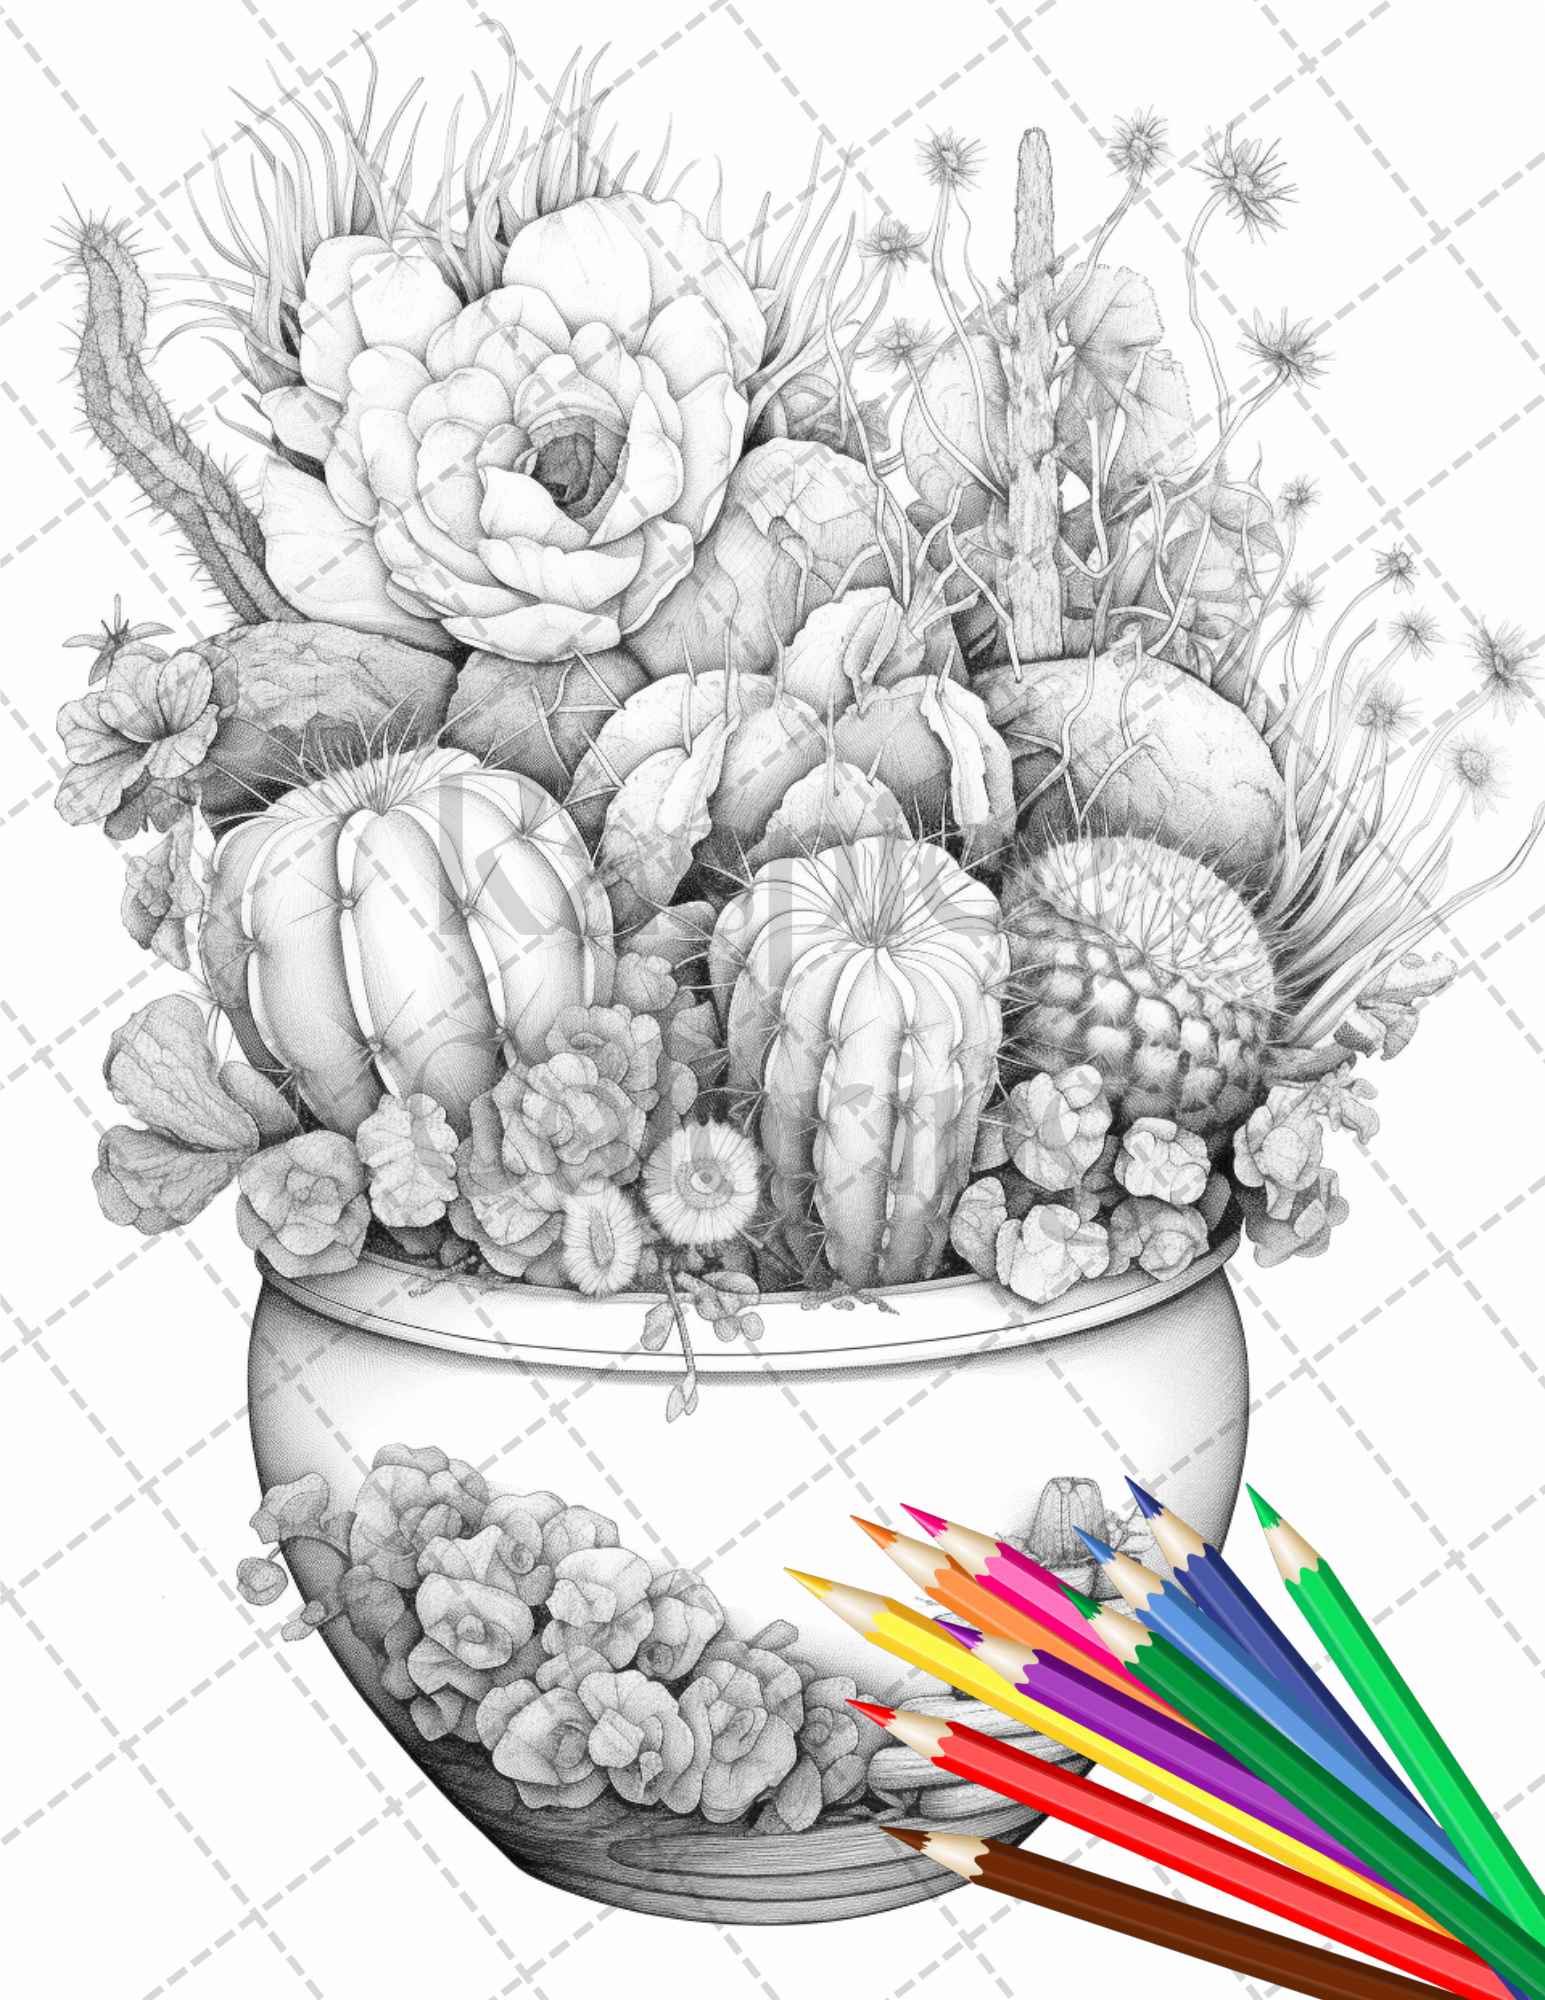 40 Charming Cactus Pots Grayscale Coloring Pages Printable for Adults, PDF File Instant Download - raspiee